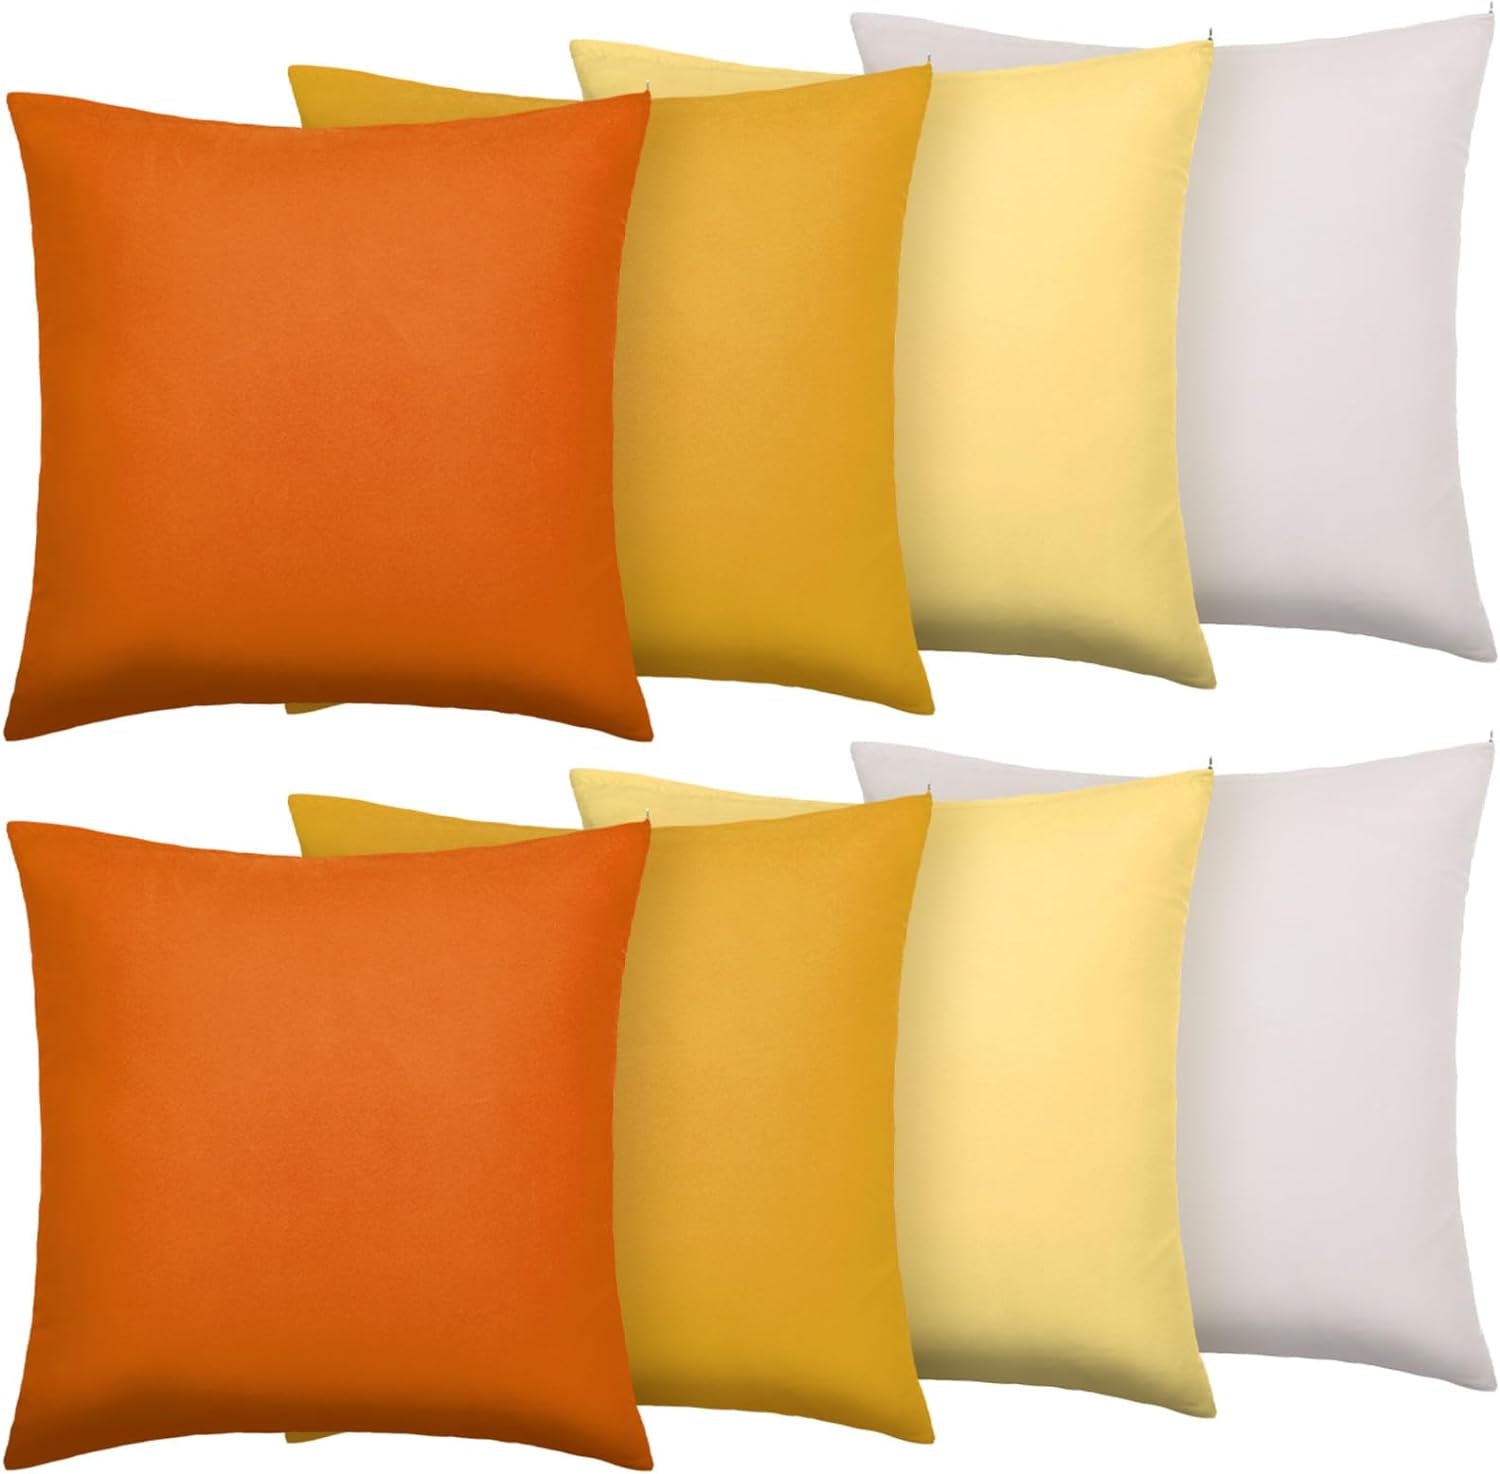 8 Pcs Decorative Throw Pillow Covers Mixed Color Throw Pillow Covers Solid Color Square Pillow Cases for Classroom Couch Bedroom Patio Garden (Covers Only)(Fresh Colors, 18 X 18 Inch)